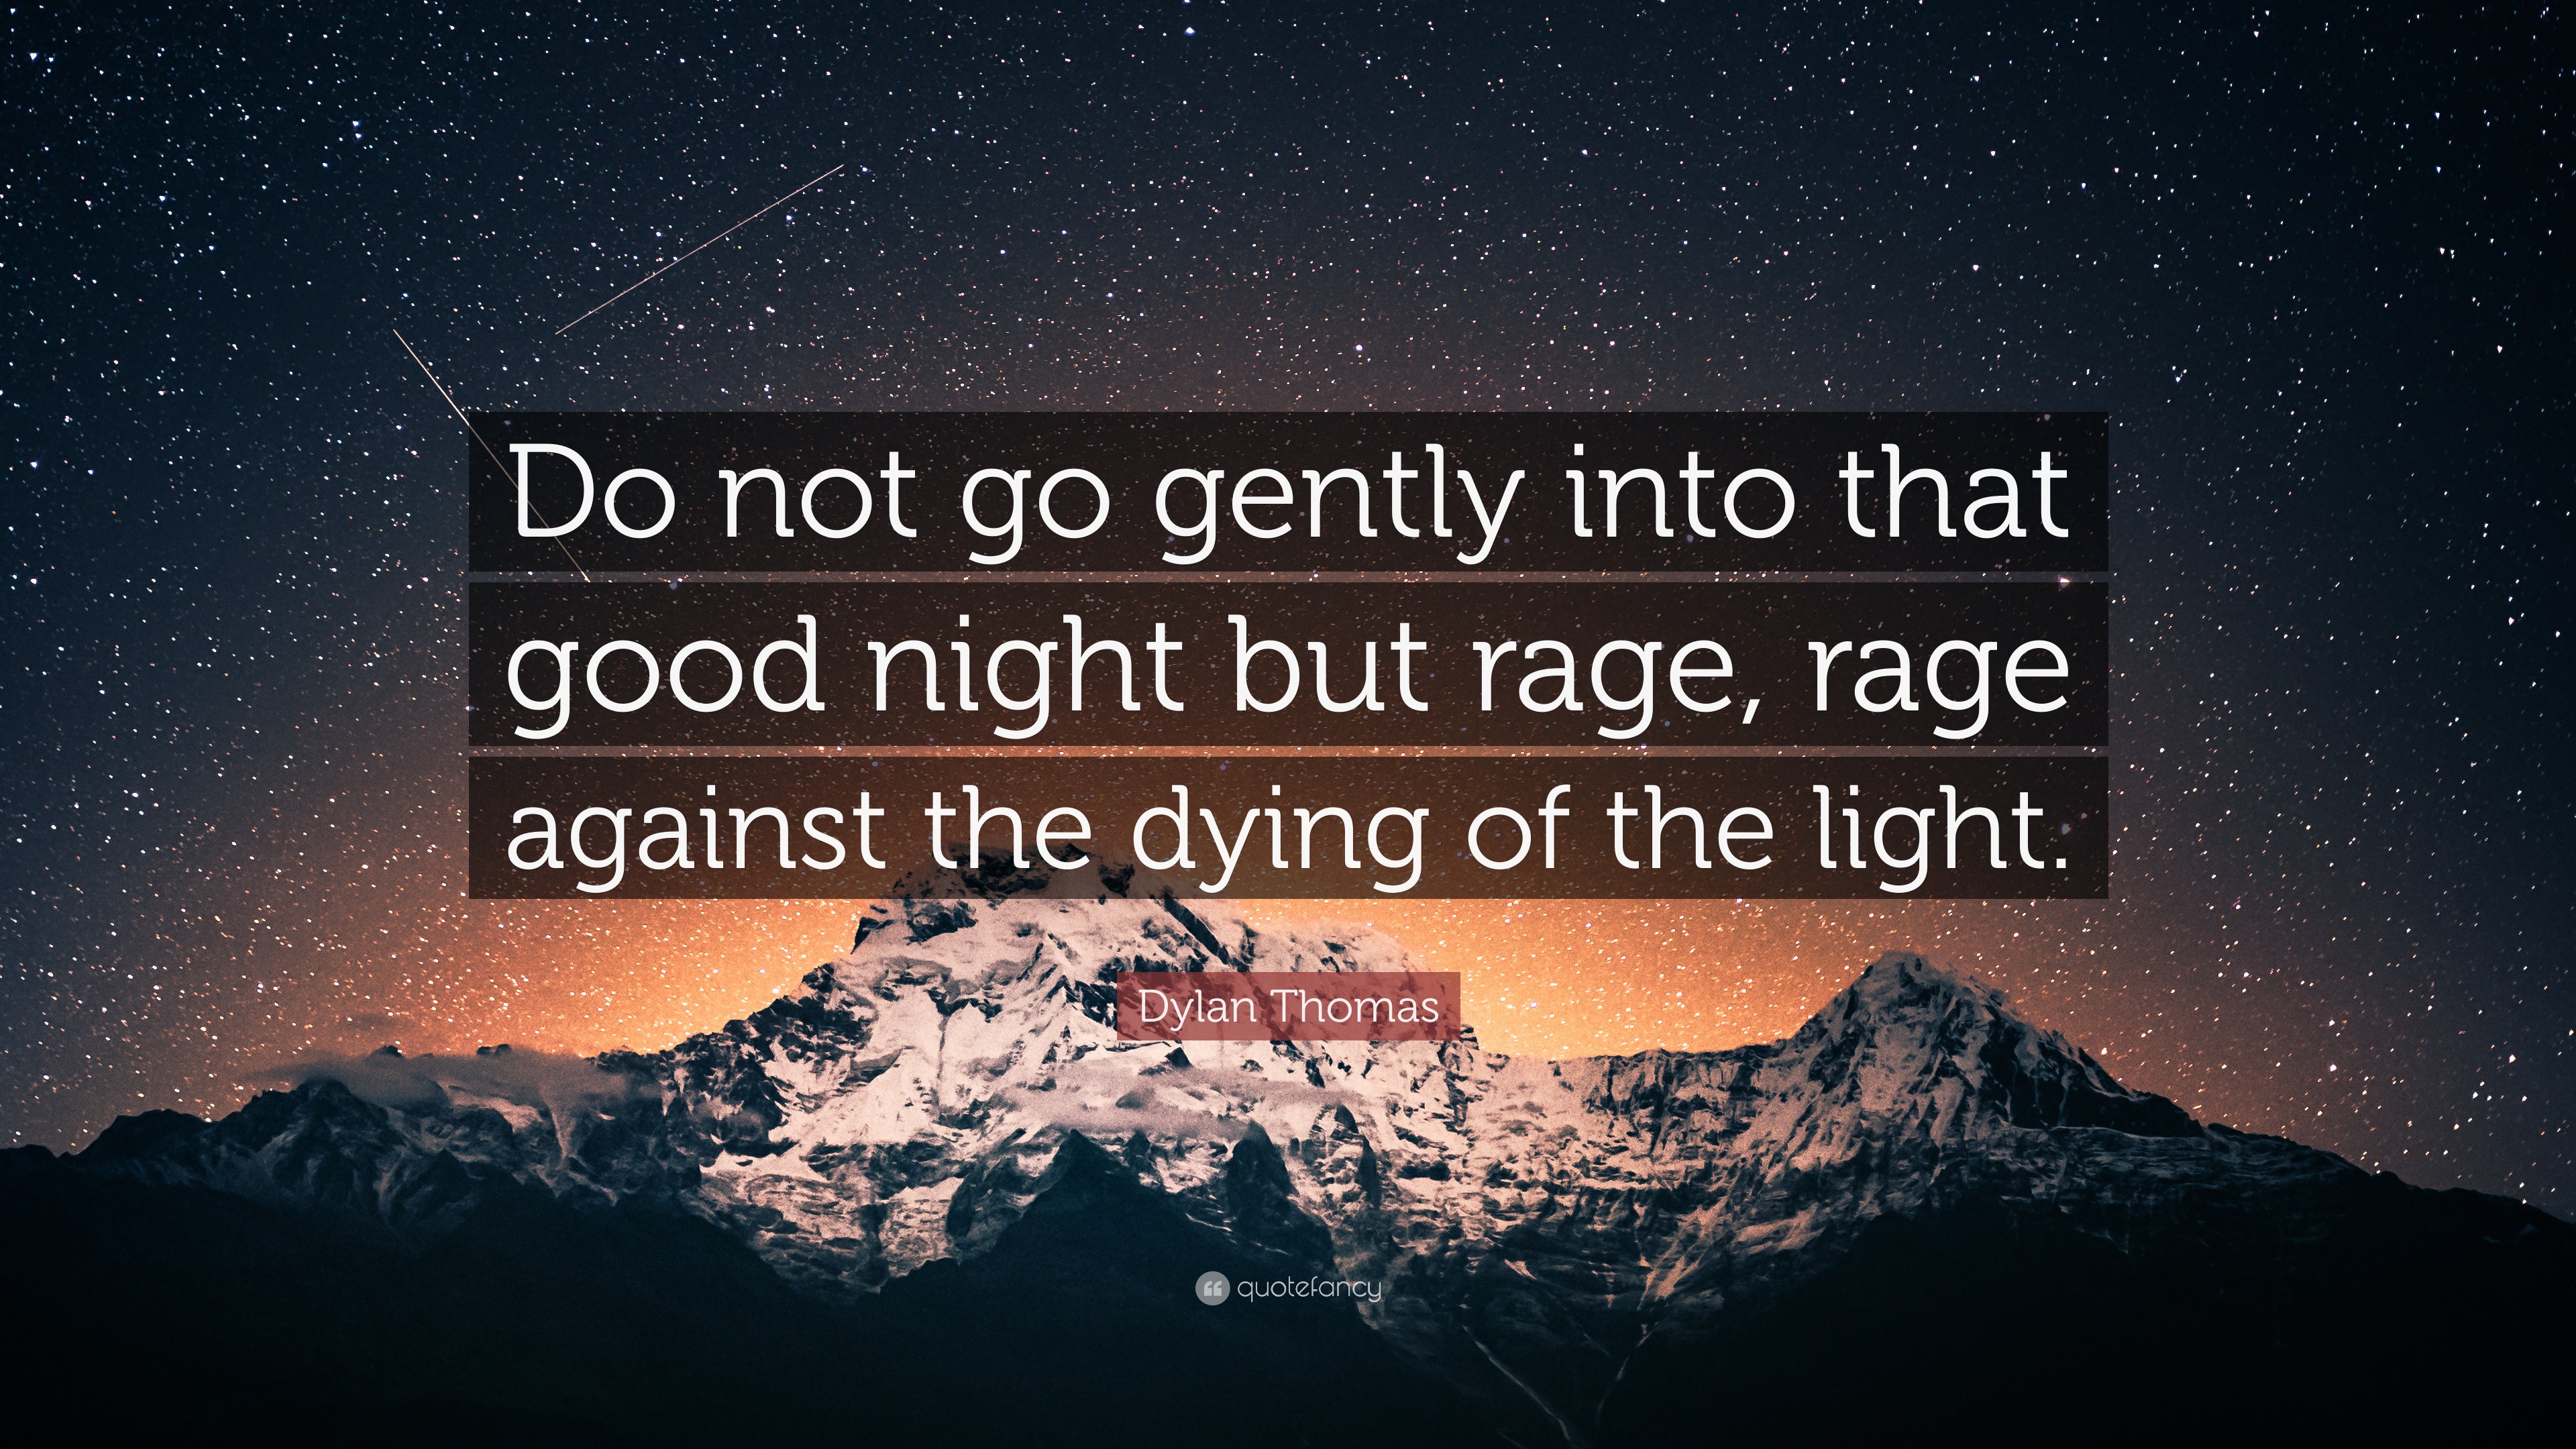 Dylan Thomas Quote: “Do not go gently into that rage, against the